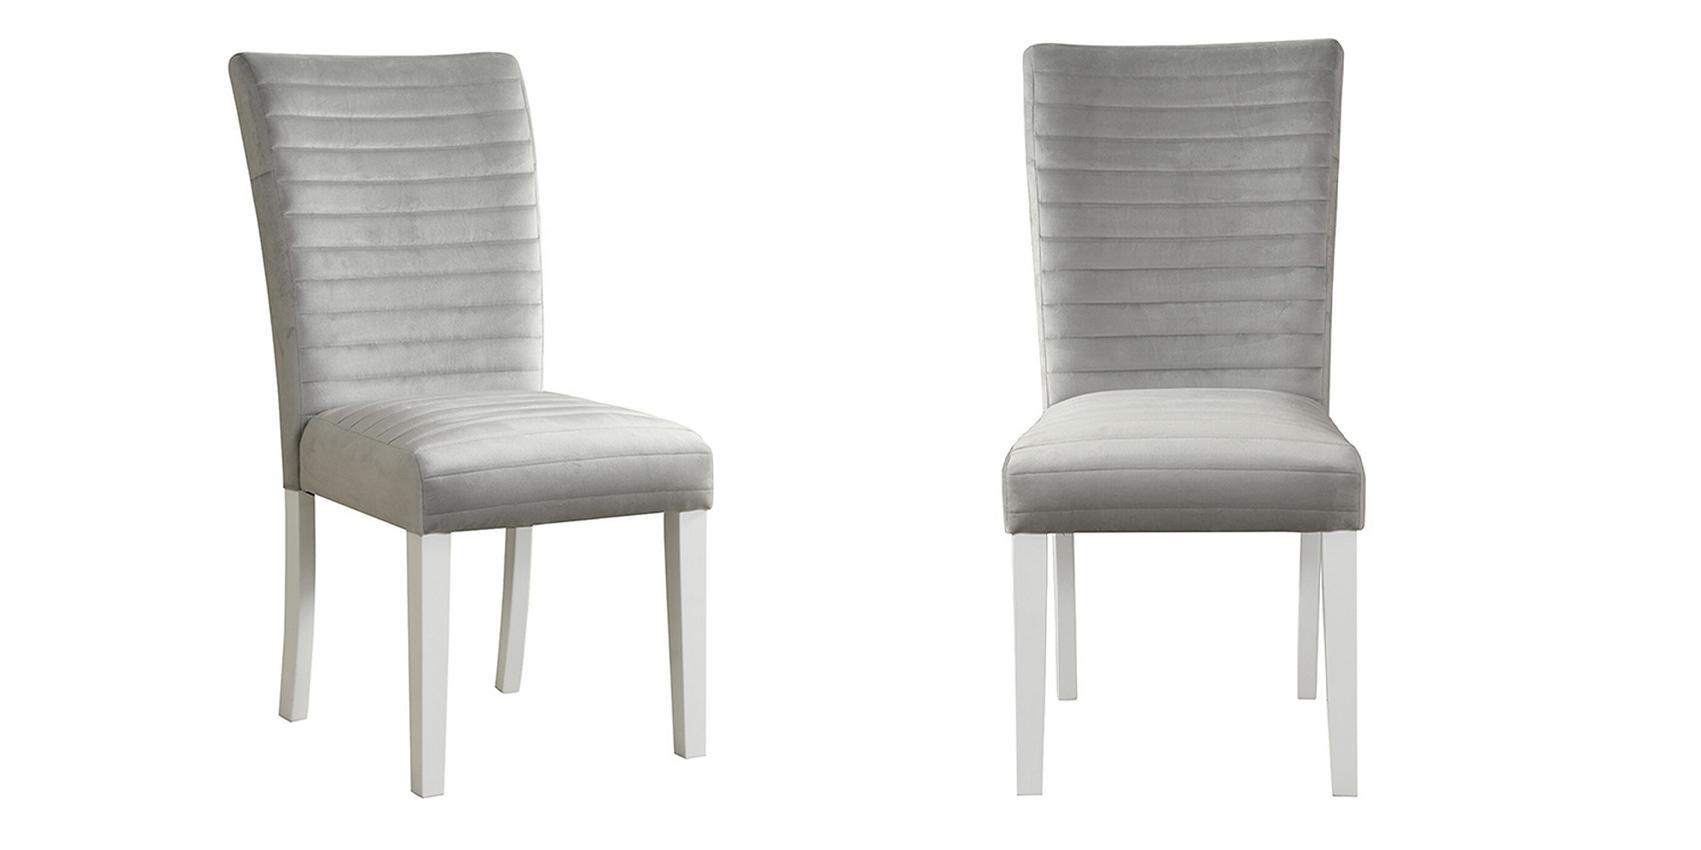 

    
D1903DC-GRY White & Silver Finish Padded Dining Chair Set 2Pcs Global USA
